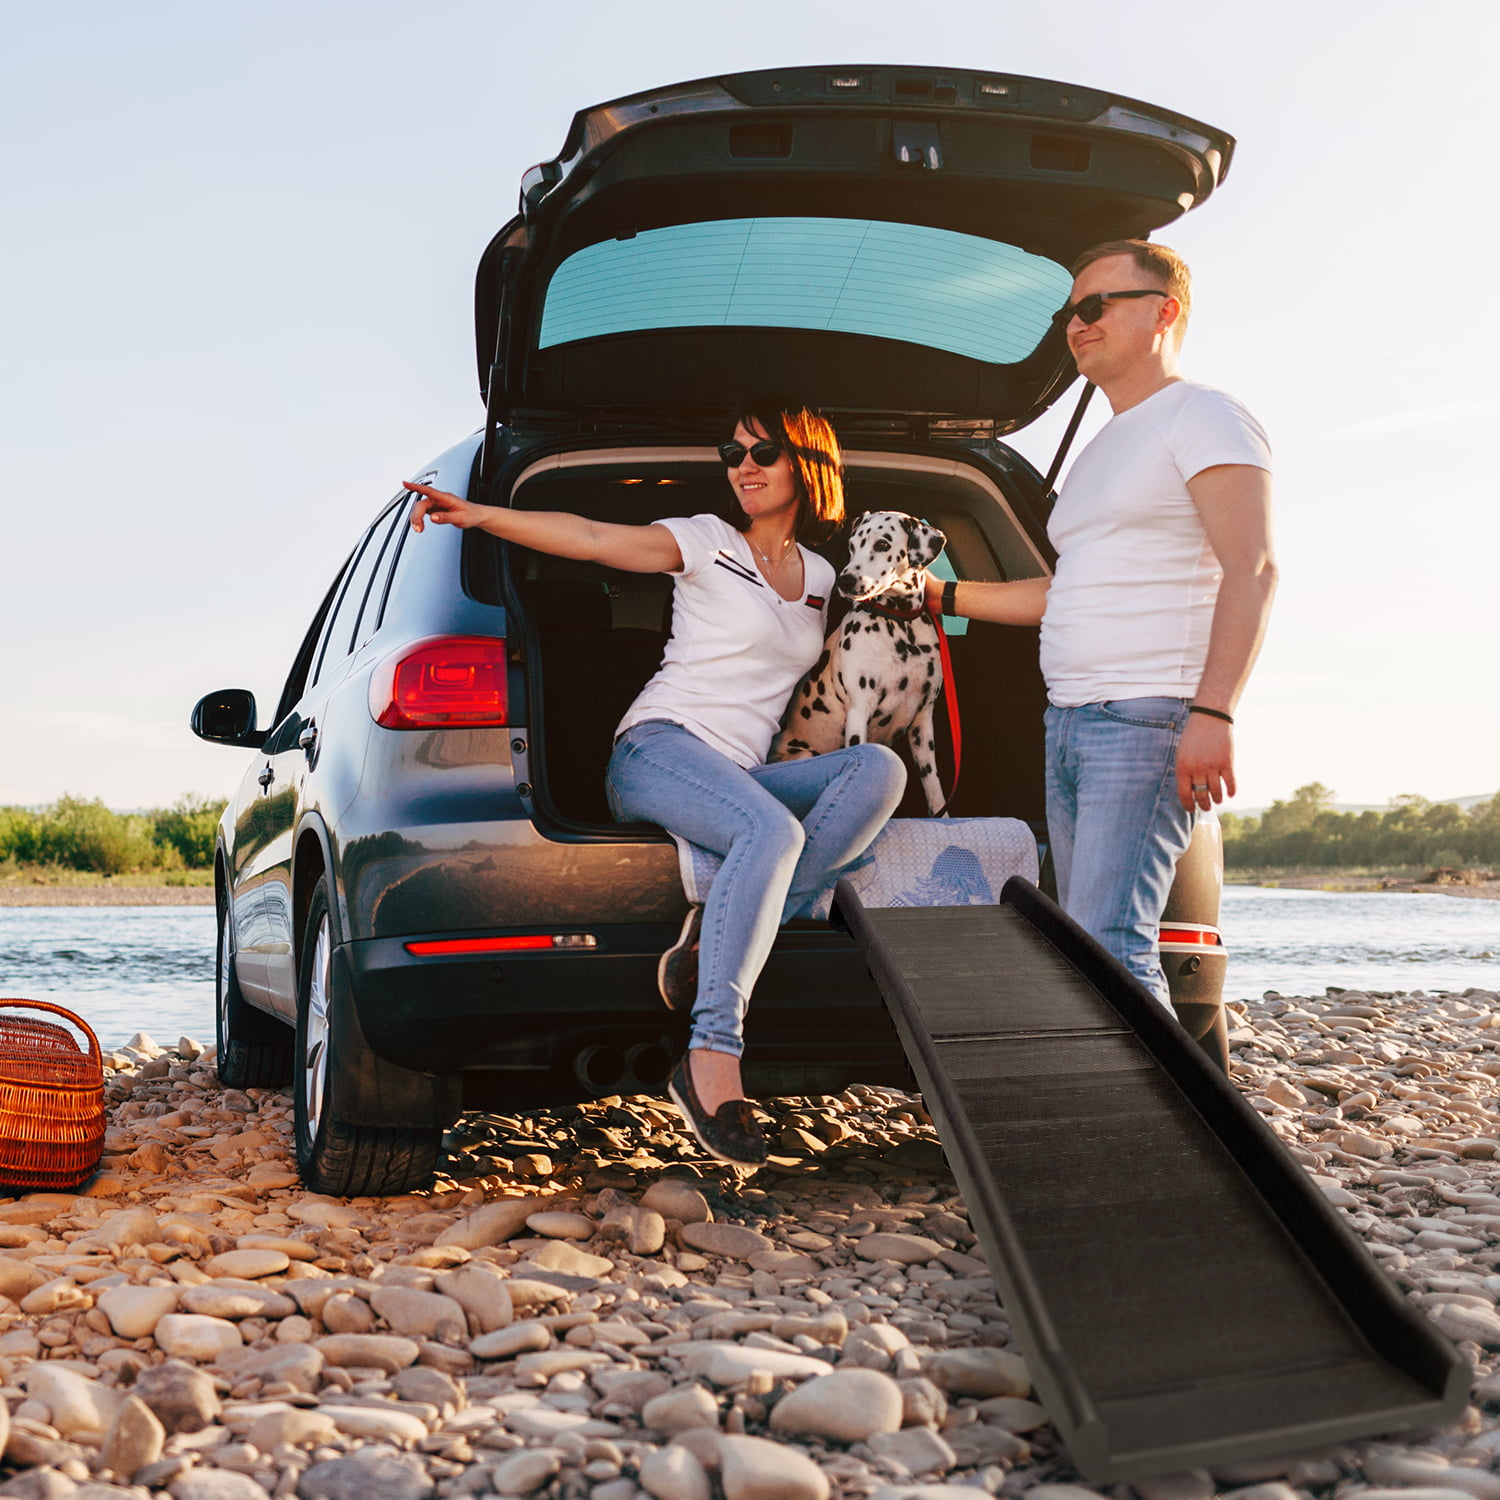 SUVs Perfect for Cars Foldable Lightweight Pet Travel Ramp with Carry Handles for Dogs and Cats Supports Over 150lbs Includes High Traction Non-Slip Incline Grass Turf Trucks Vans Automobiles 